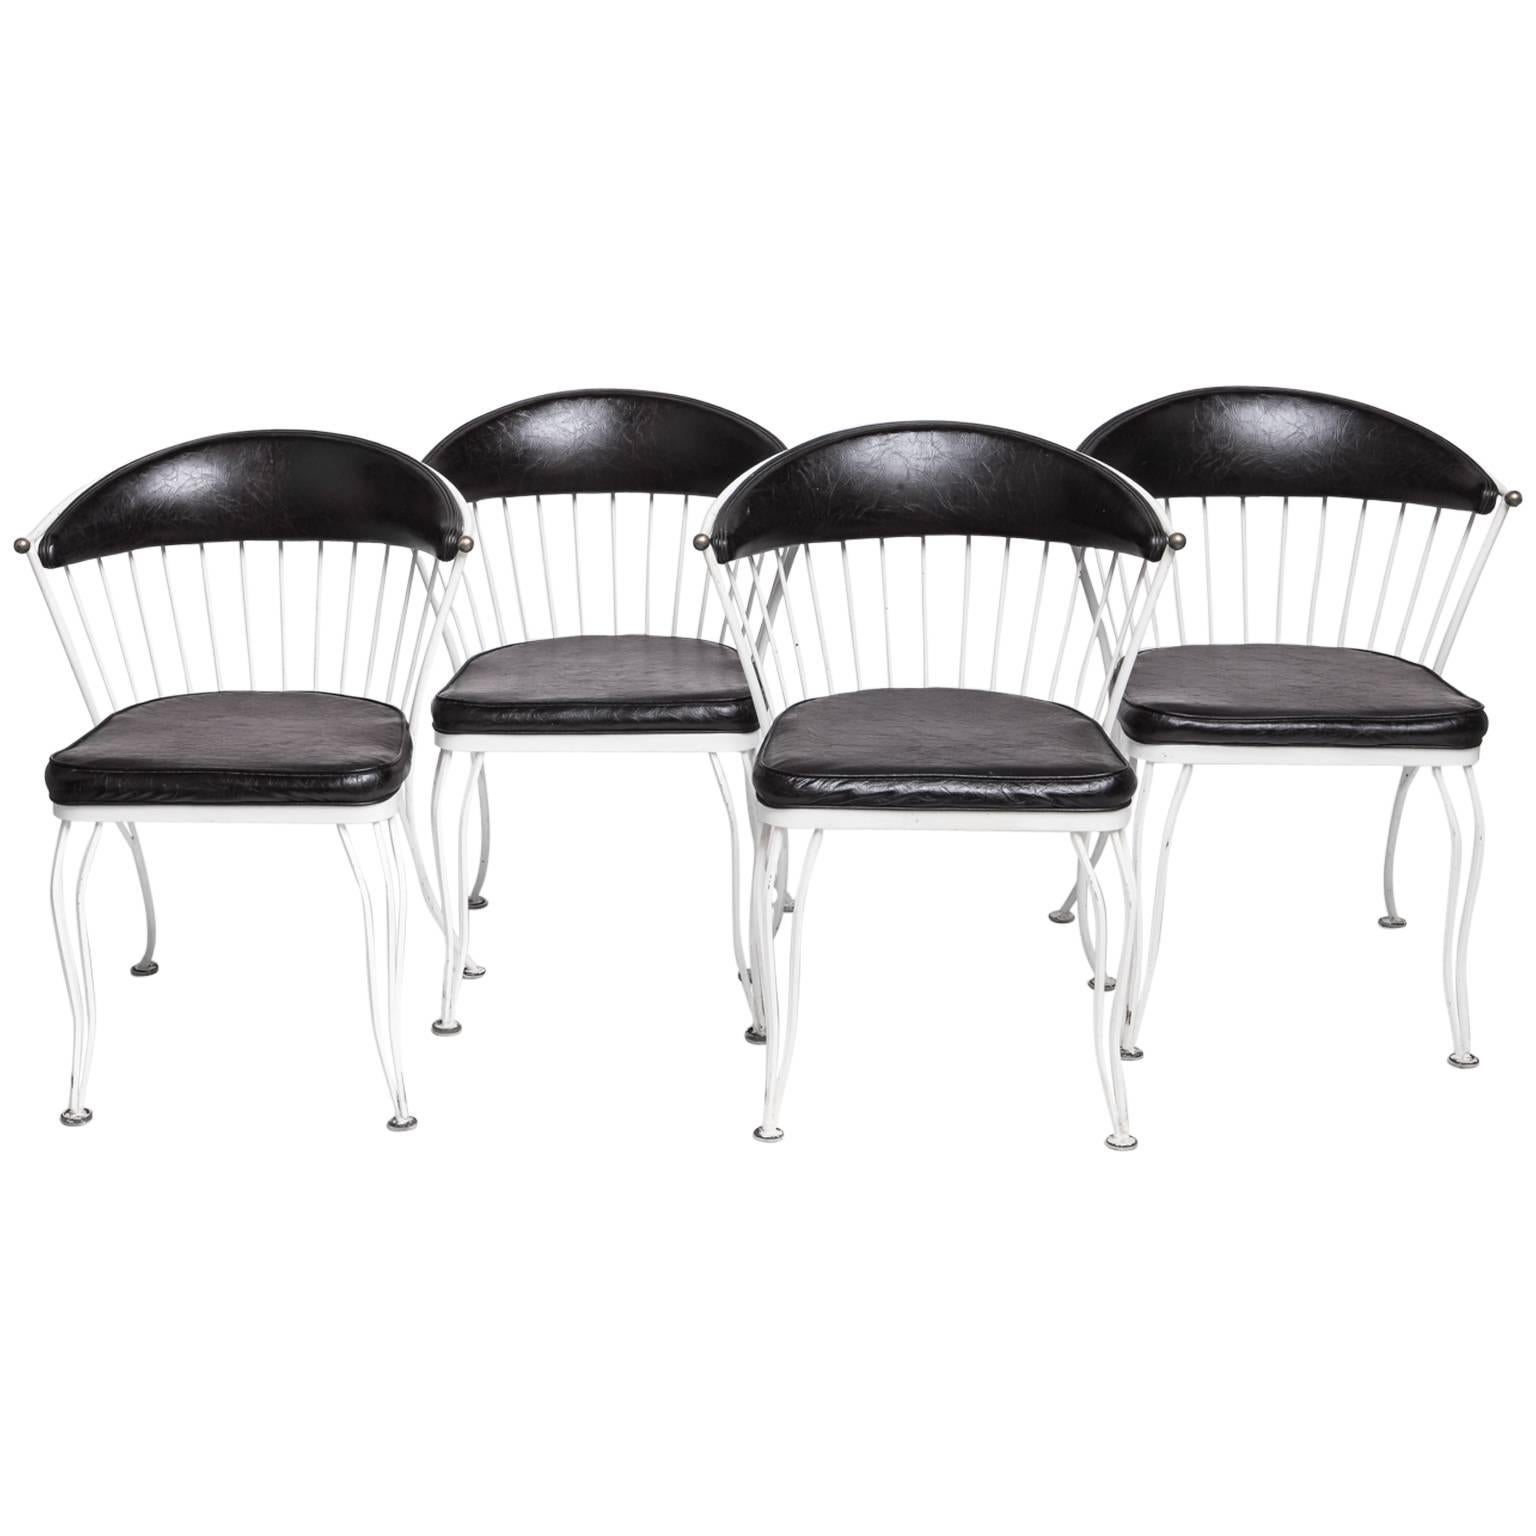 Set of Four Mid-Century Wrought Iron Chairs